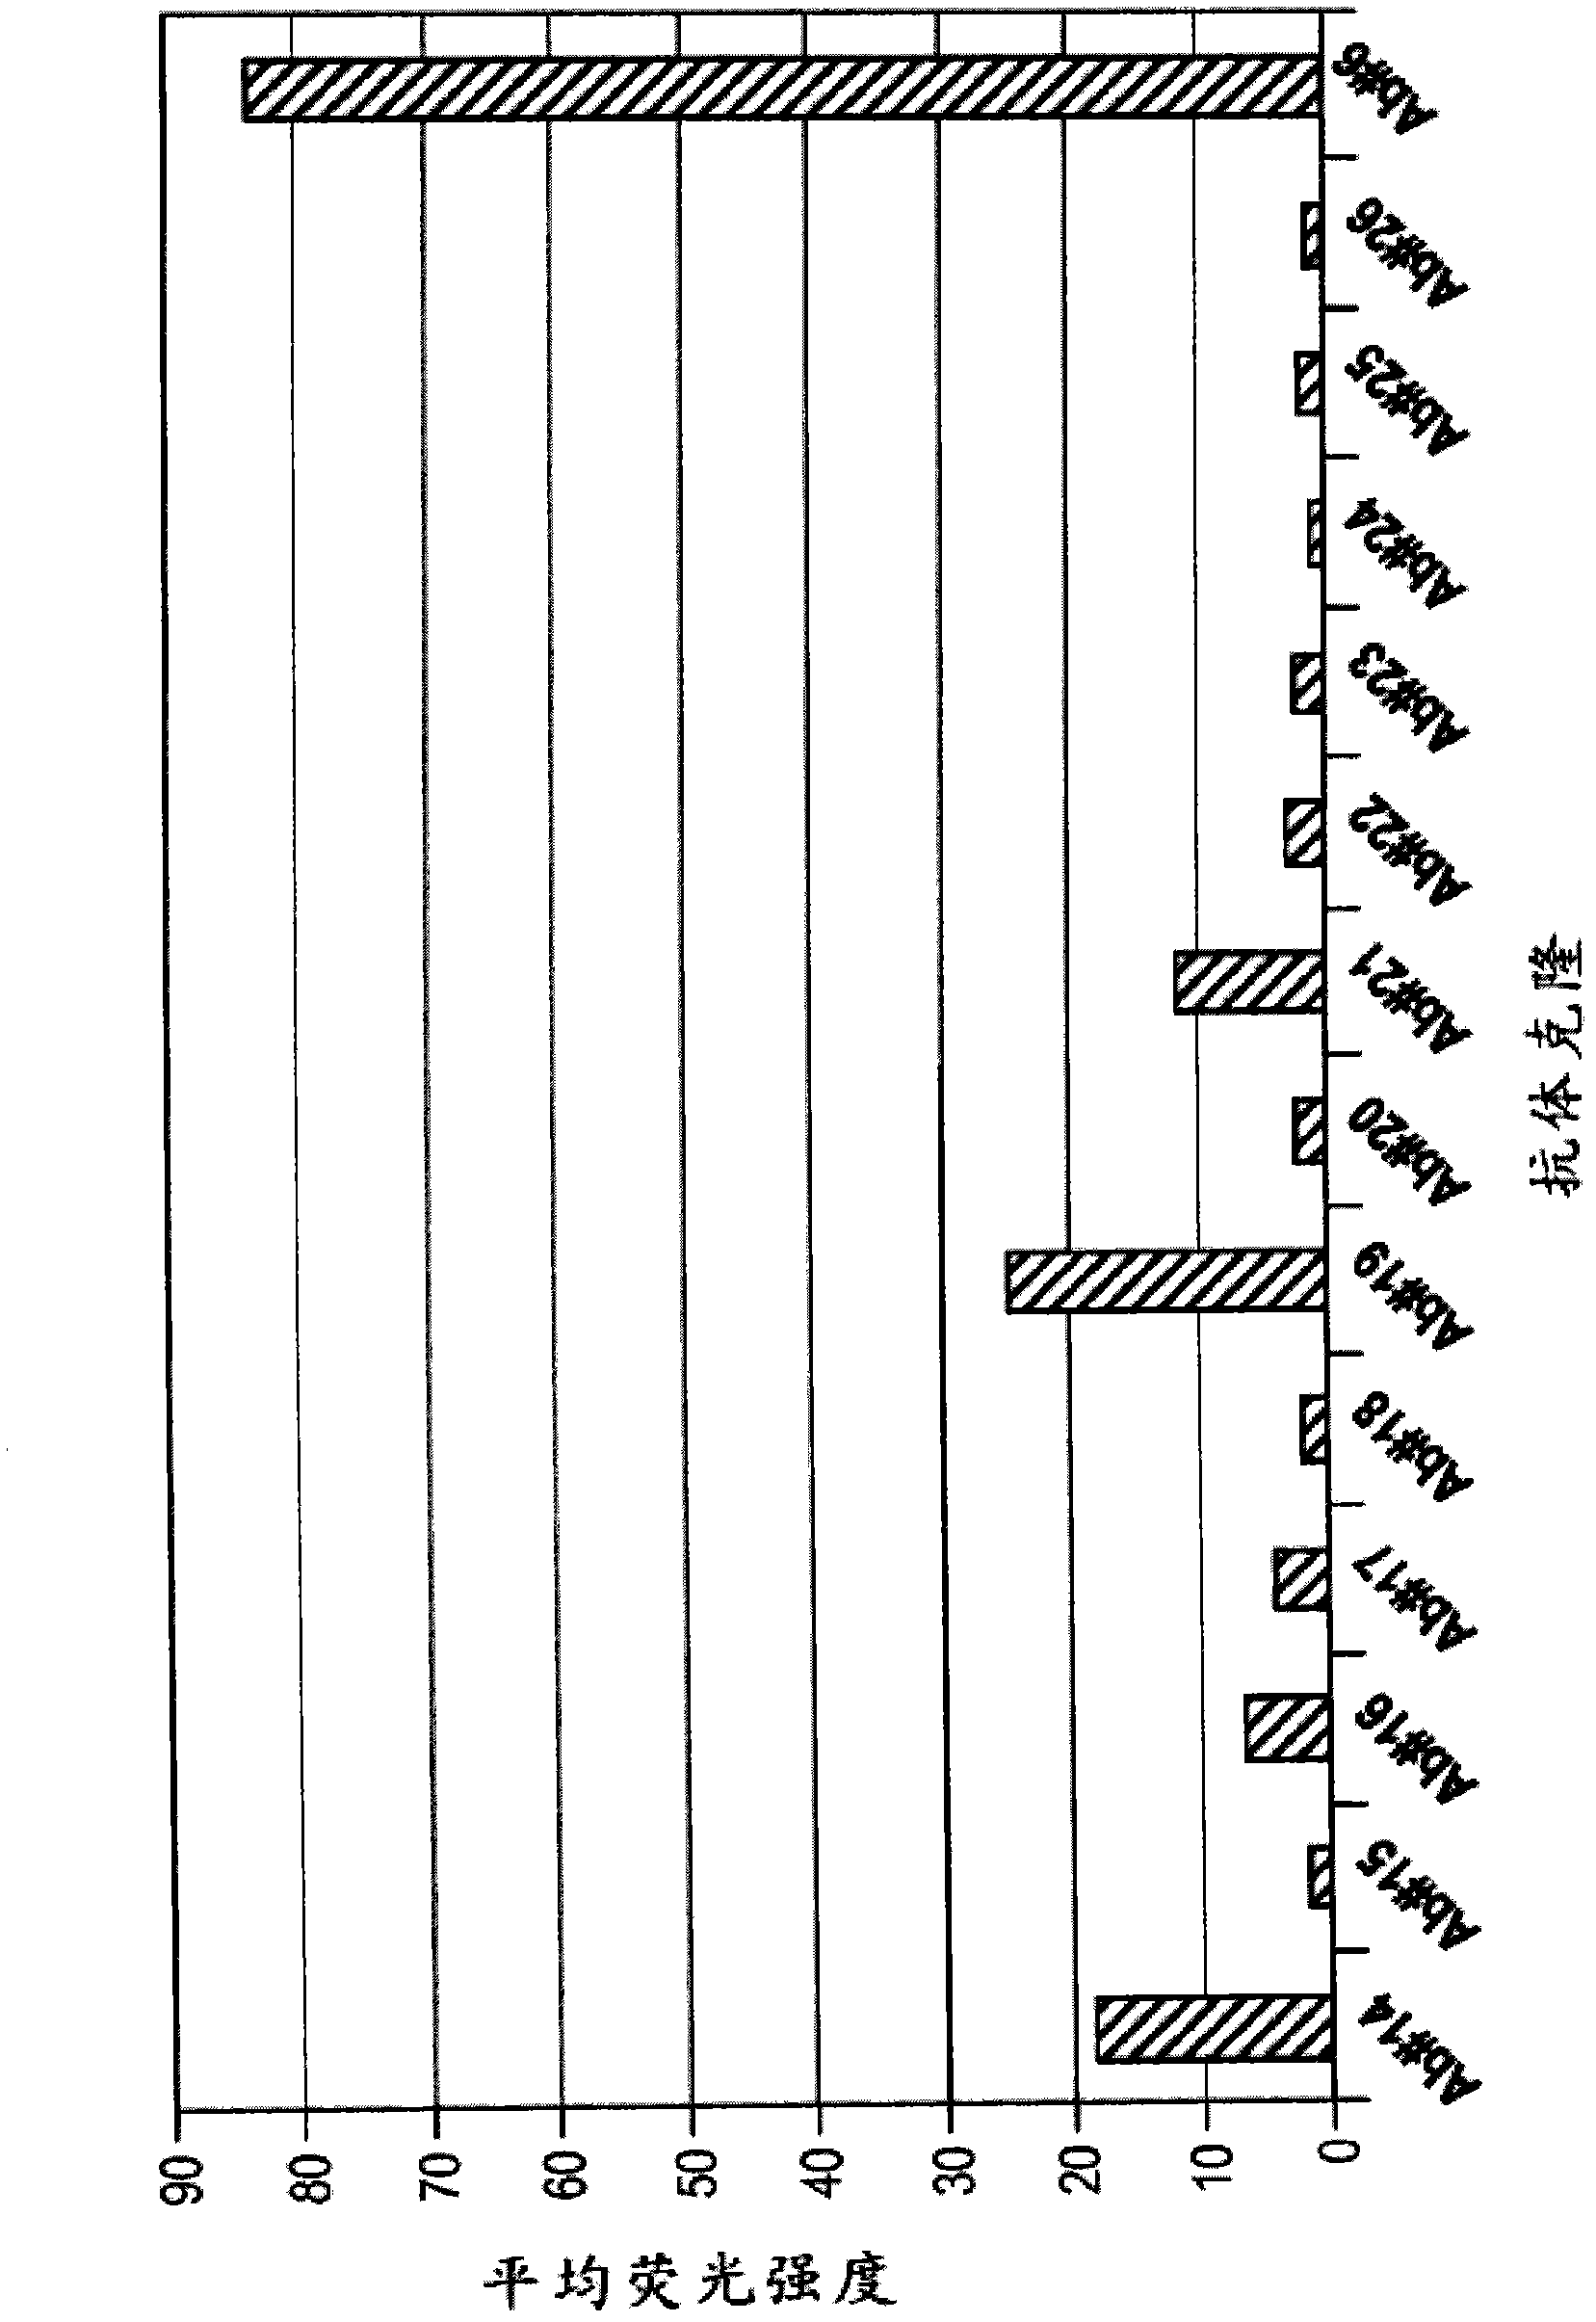 Antibodies against the ectodomain of ErbB3 and uses thereof